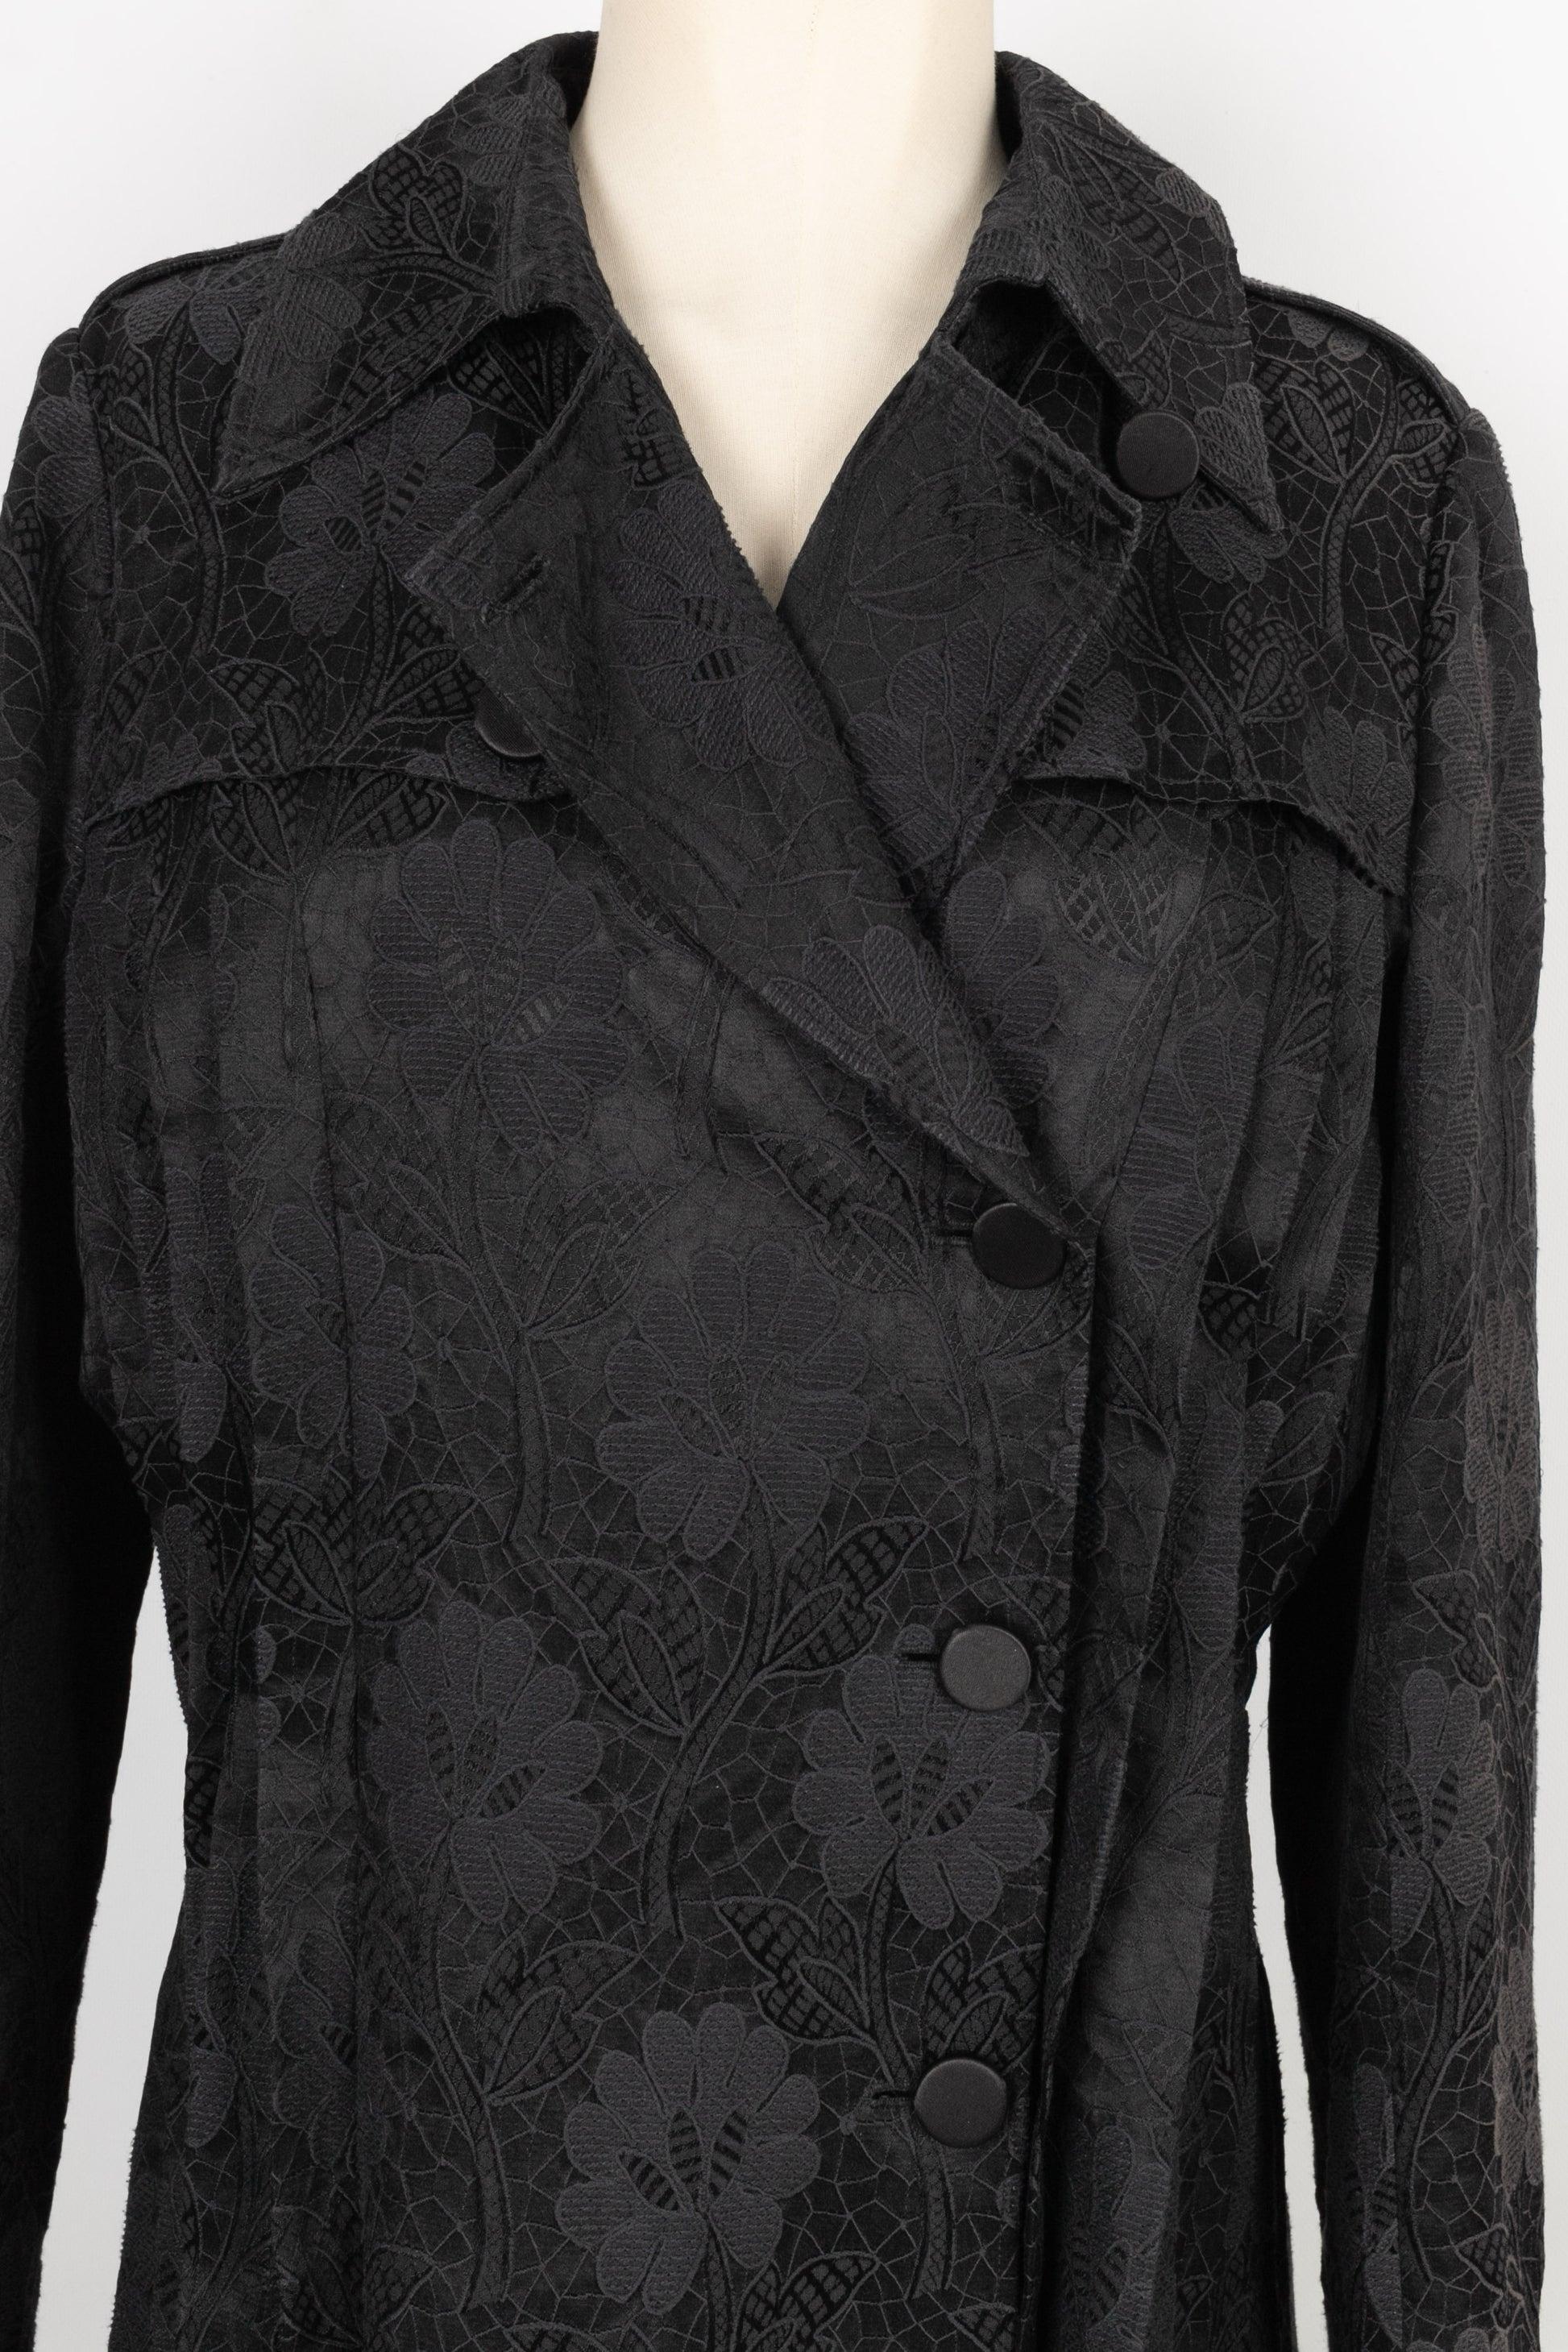 Galliano Black Cotton Trench-style Coat Illustrated with Flowers For Sale 1